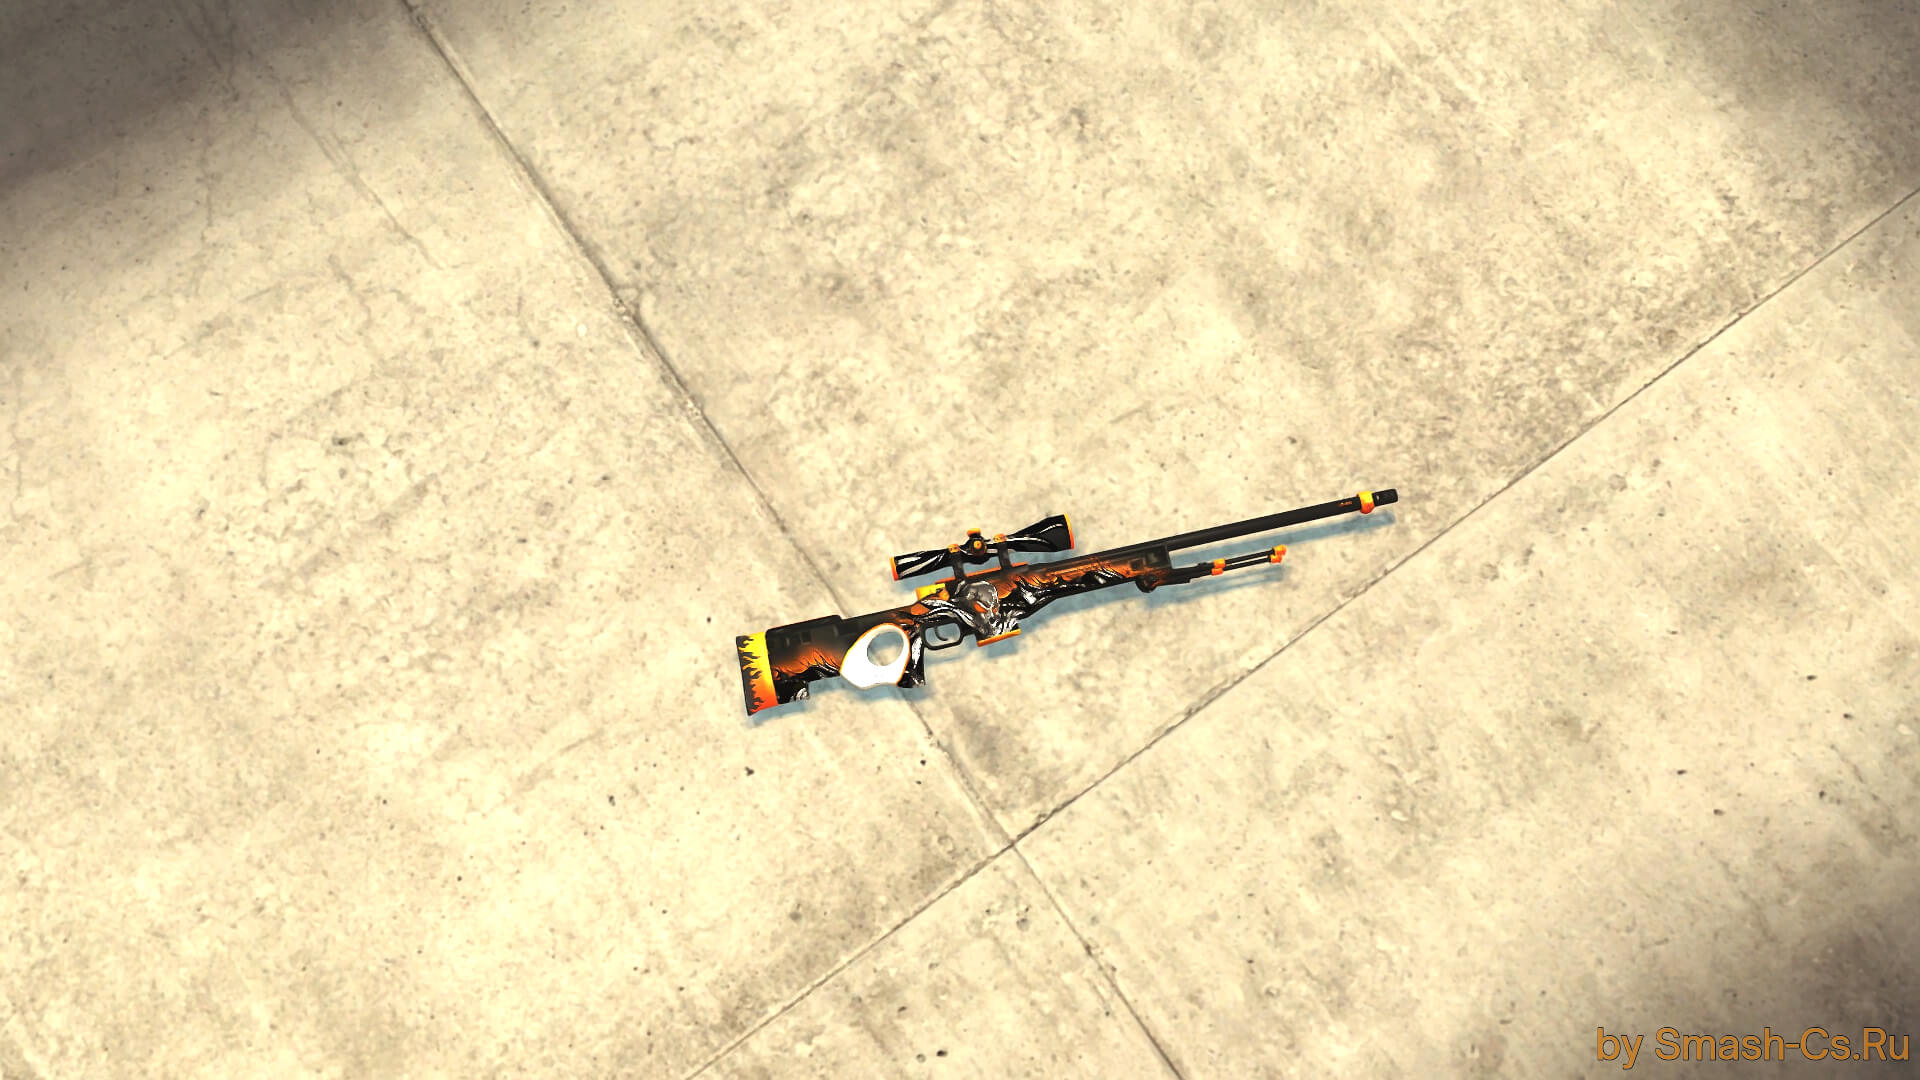 Awp containment breach well worn фото 81